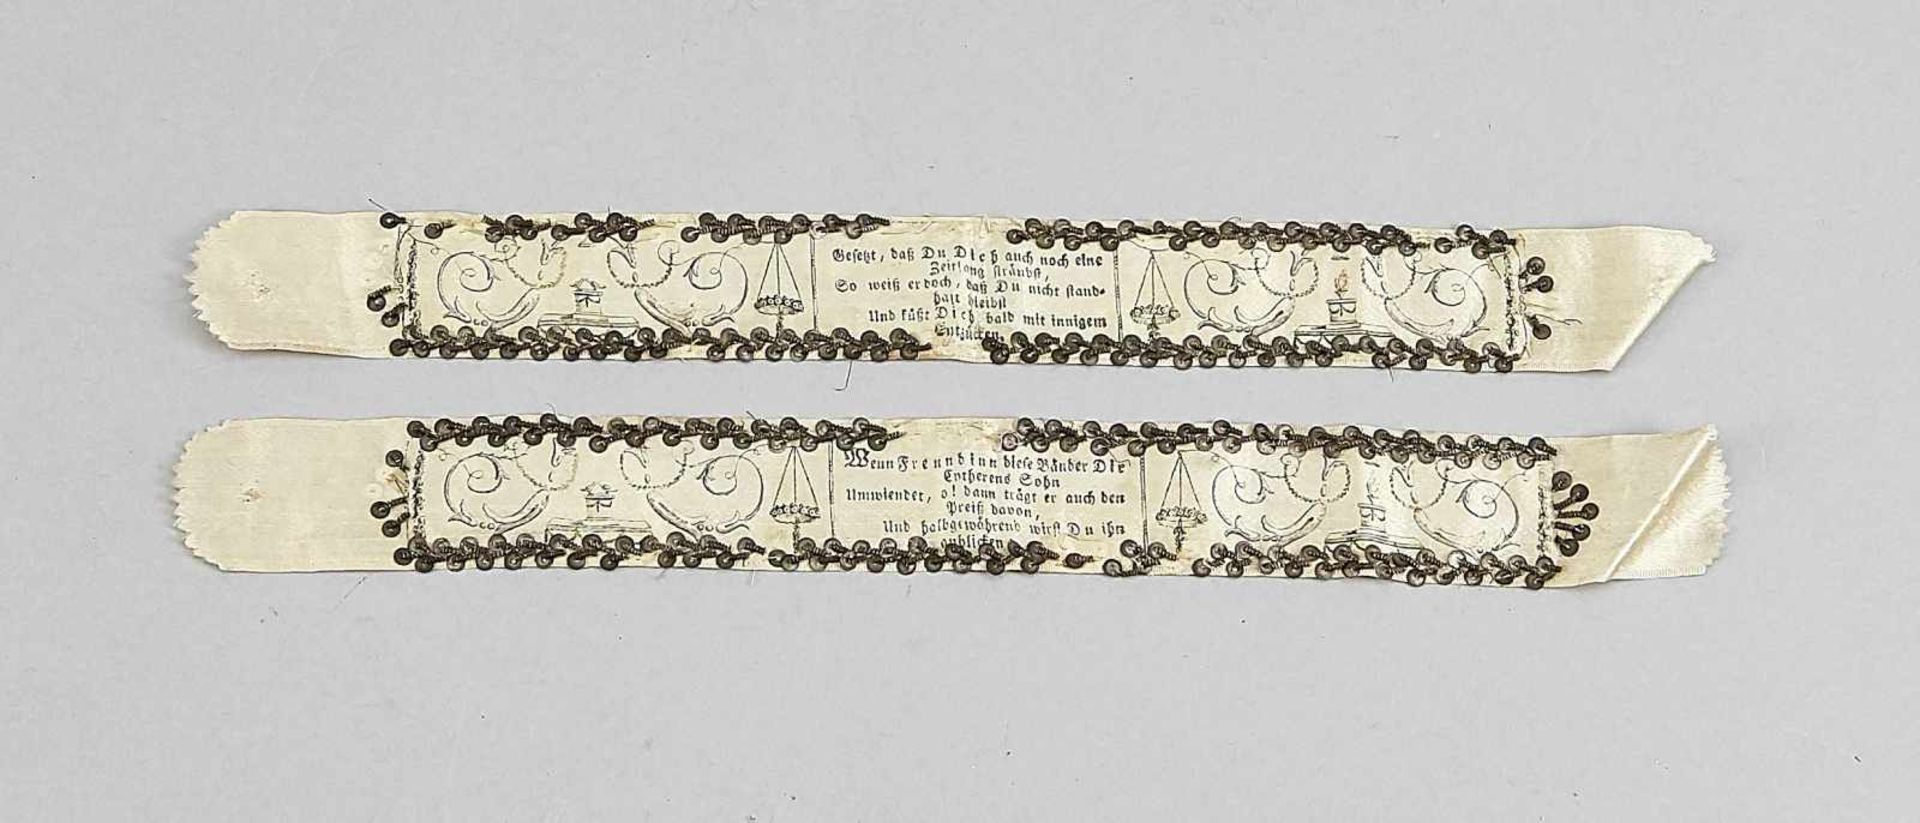 A pair of Rococo garters with erotic verses, Germany, 18th century, silk, printed and